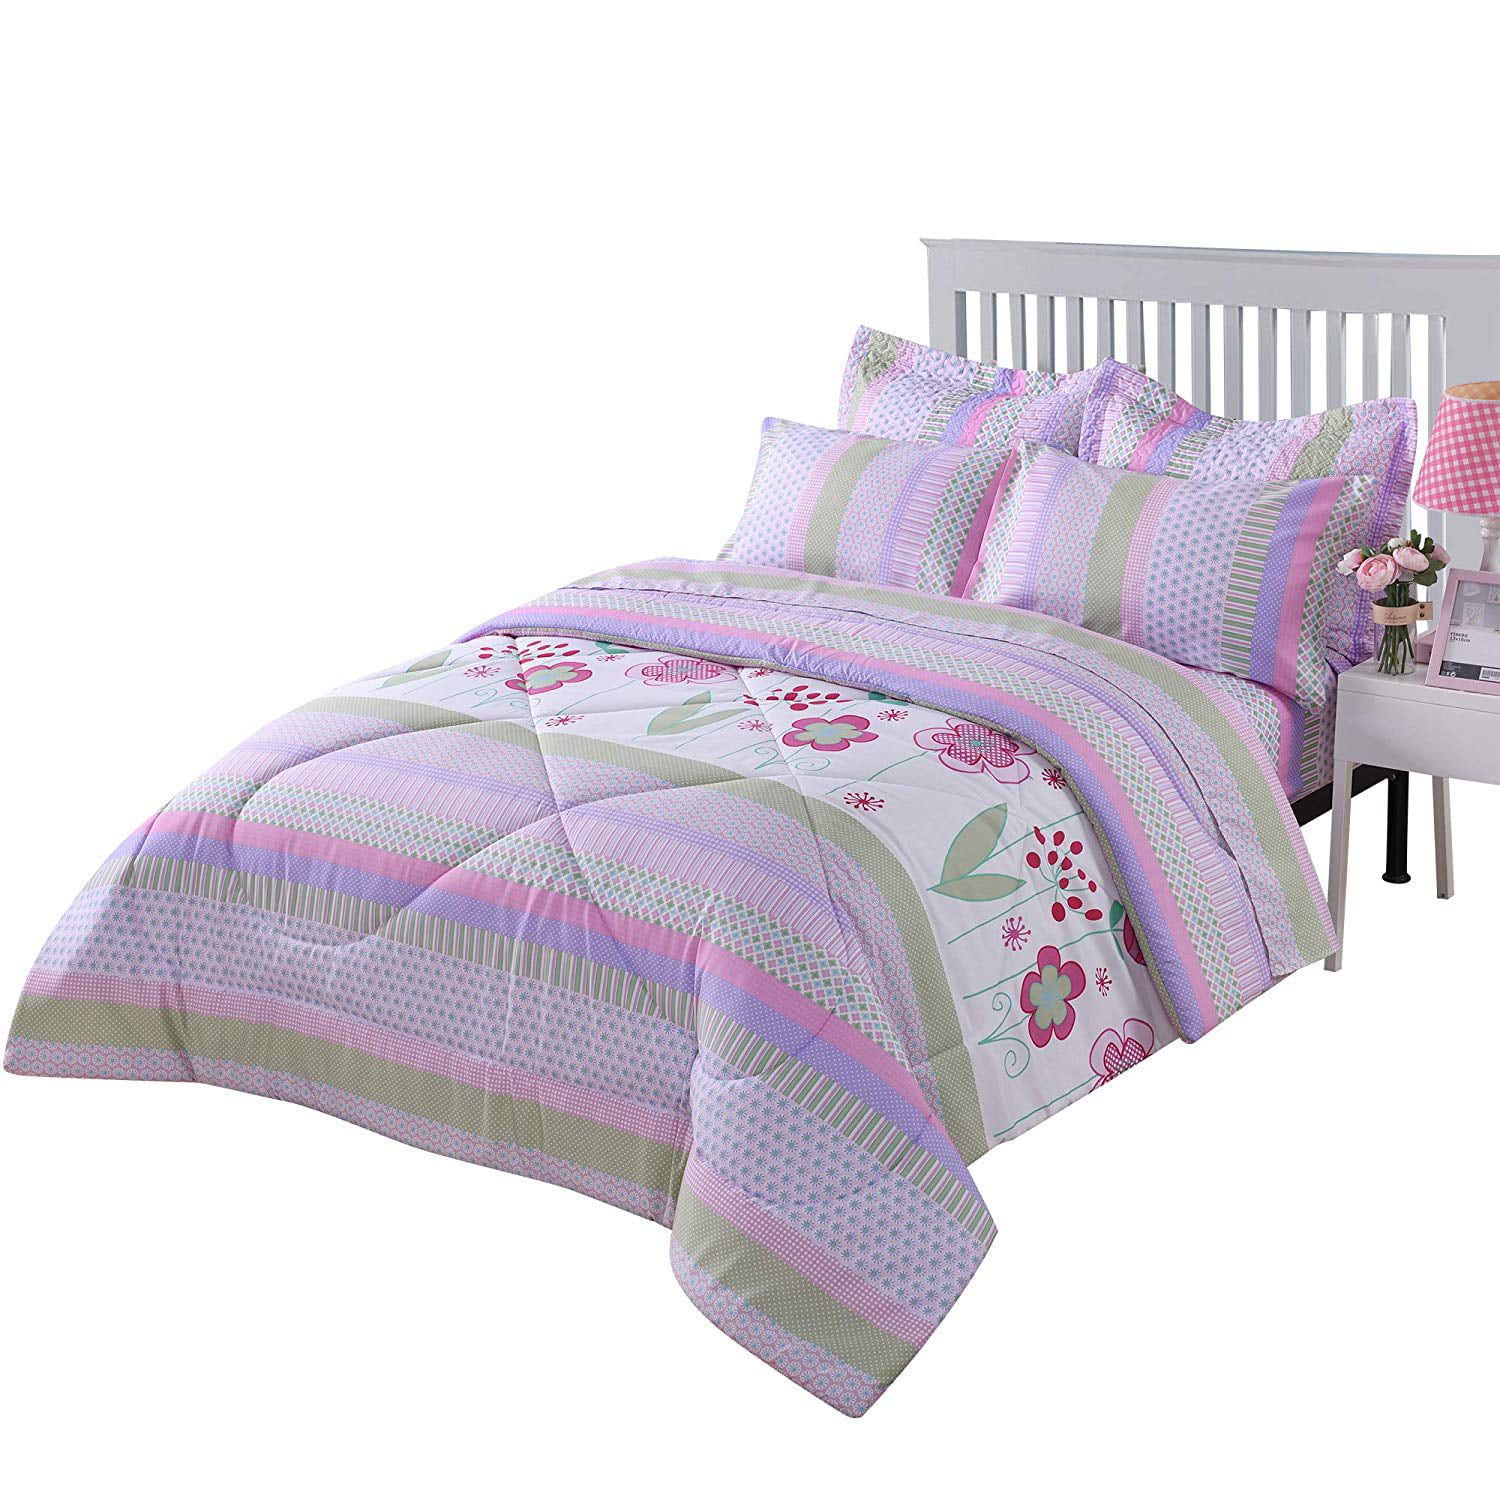 Peace Sign Bedding Set For Girls Comforter Teens Twin Bed In A Bag Floral 5 Pc 